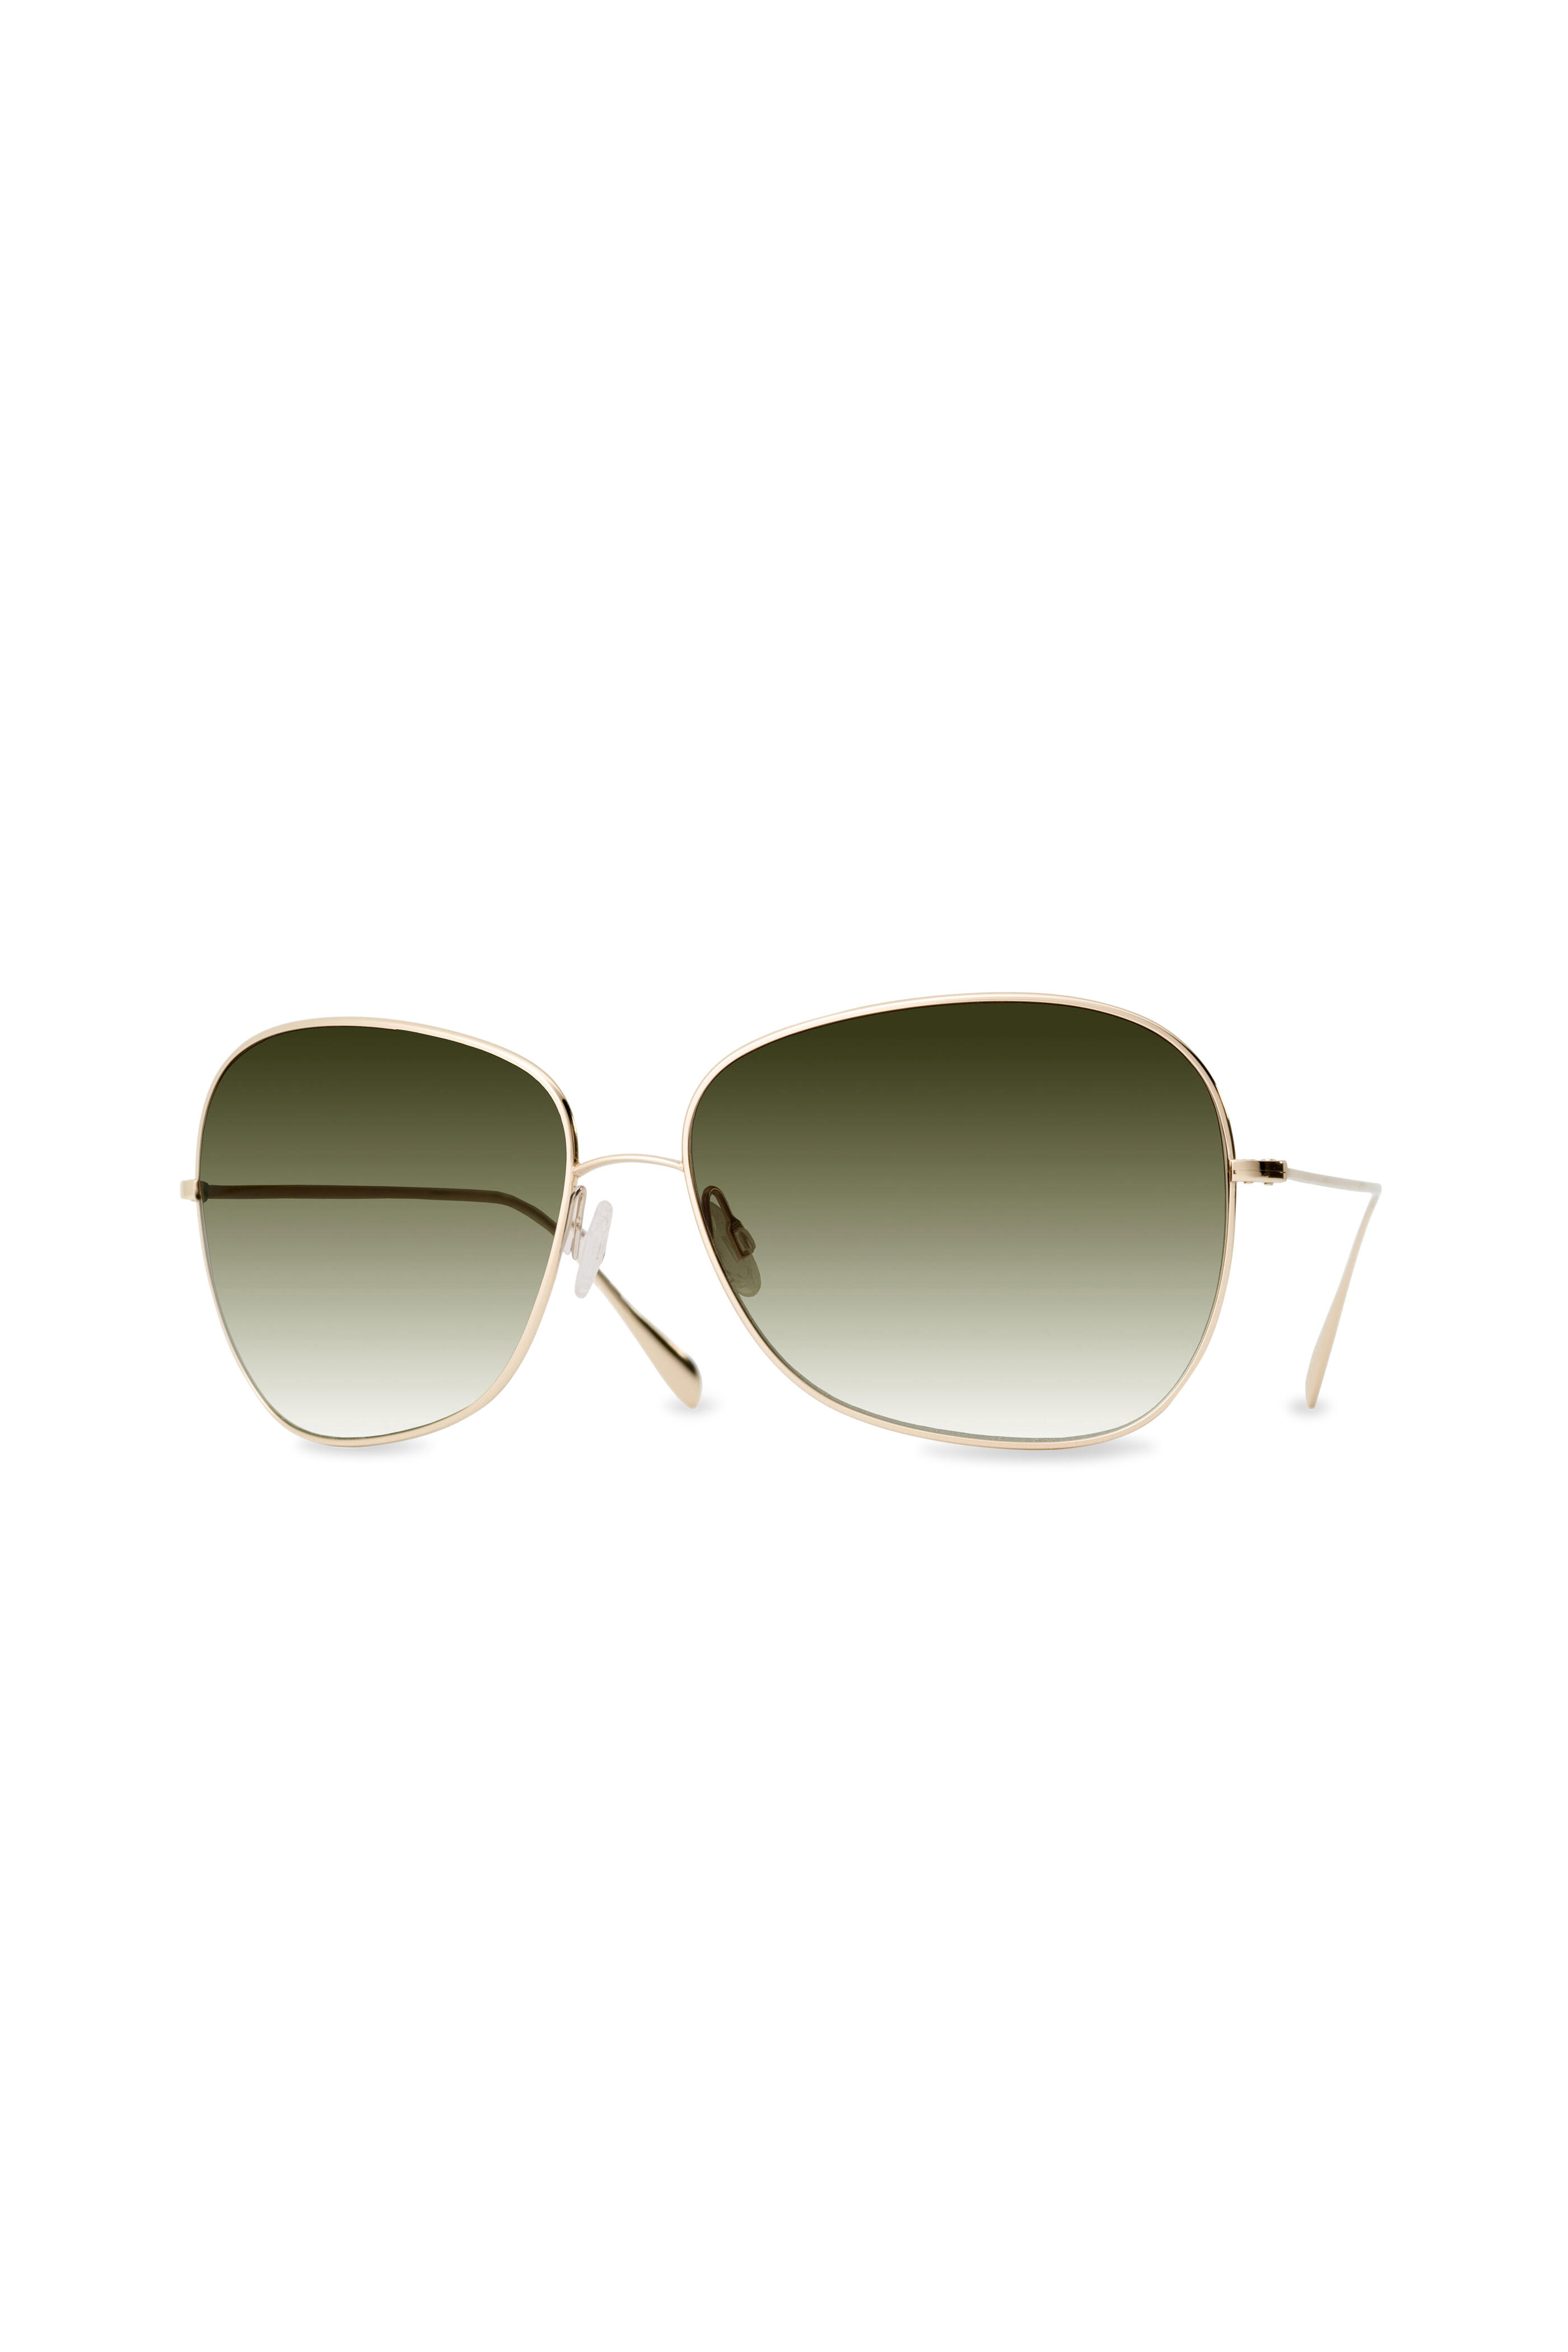 Oliver Peoples - Elsie Gold Aviator Sunglasses | Mitchell Stores